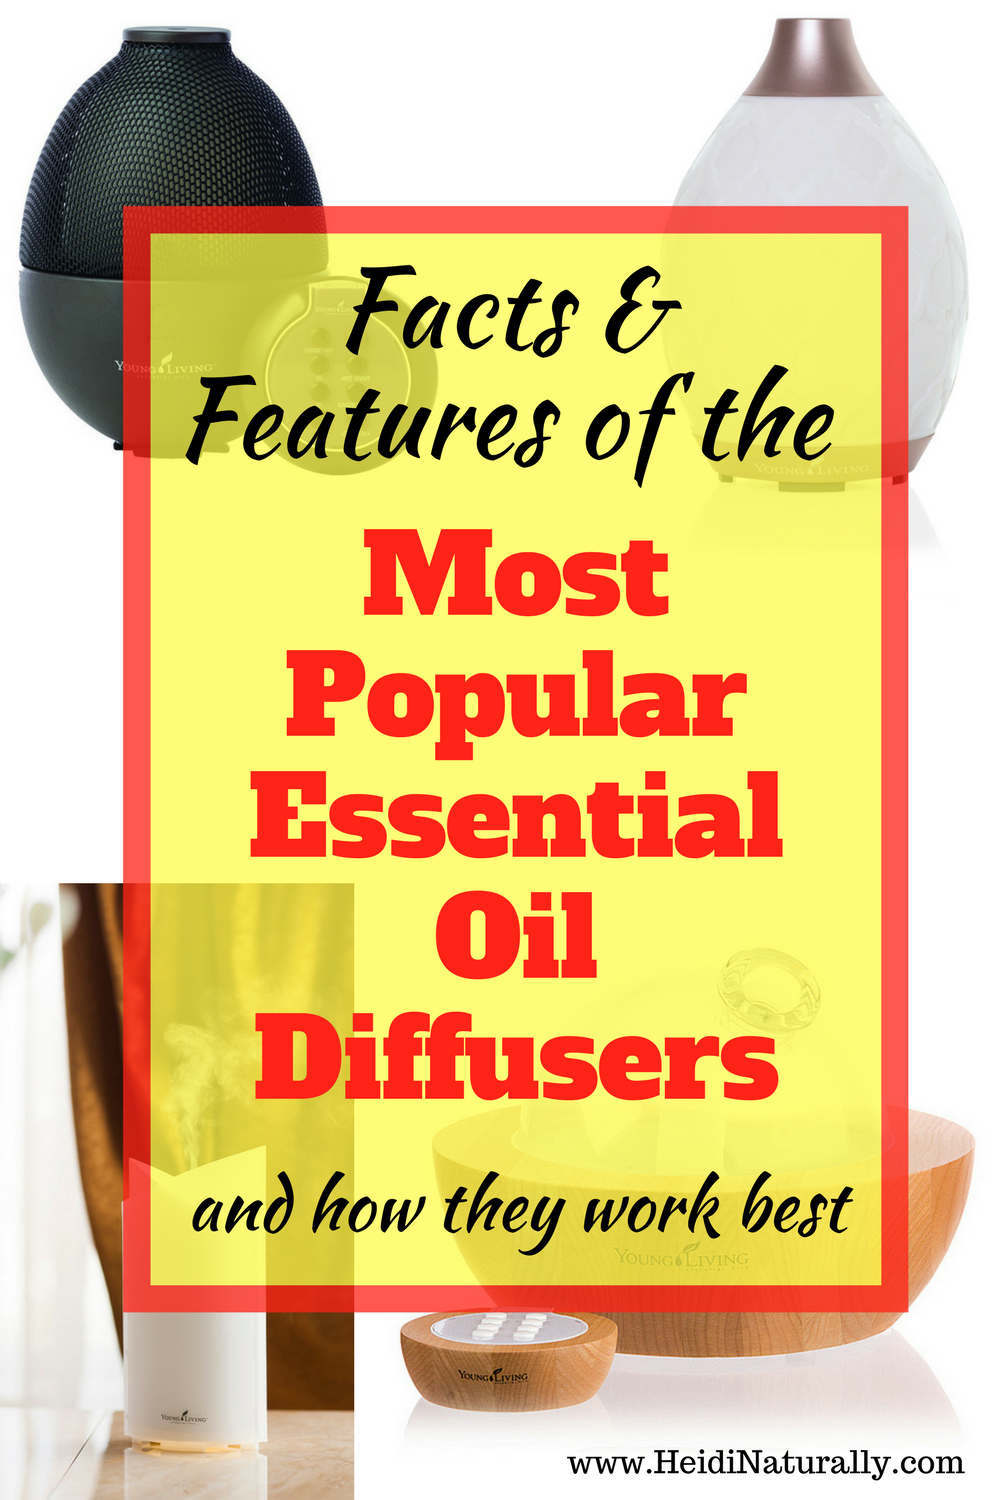 Find out the facts and features of the most popular essential oil diffusers and how they work. Learn everything you need to know about essential oils and how to use them successfully. 